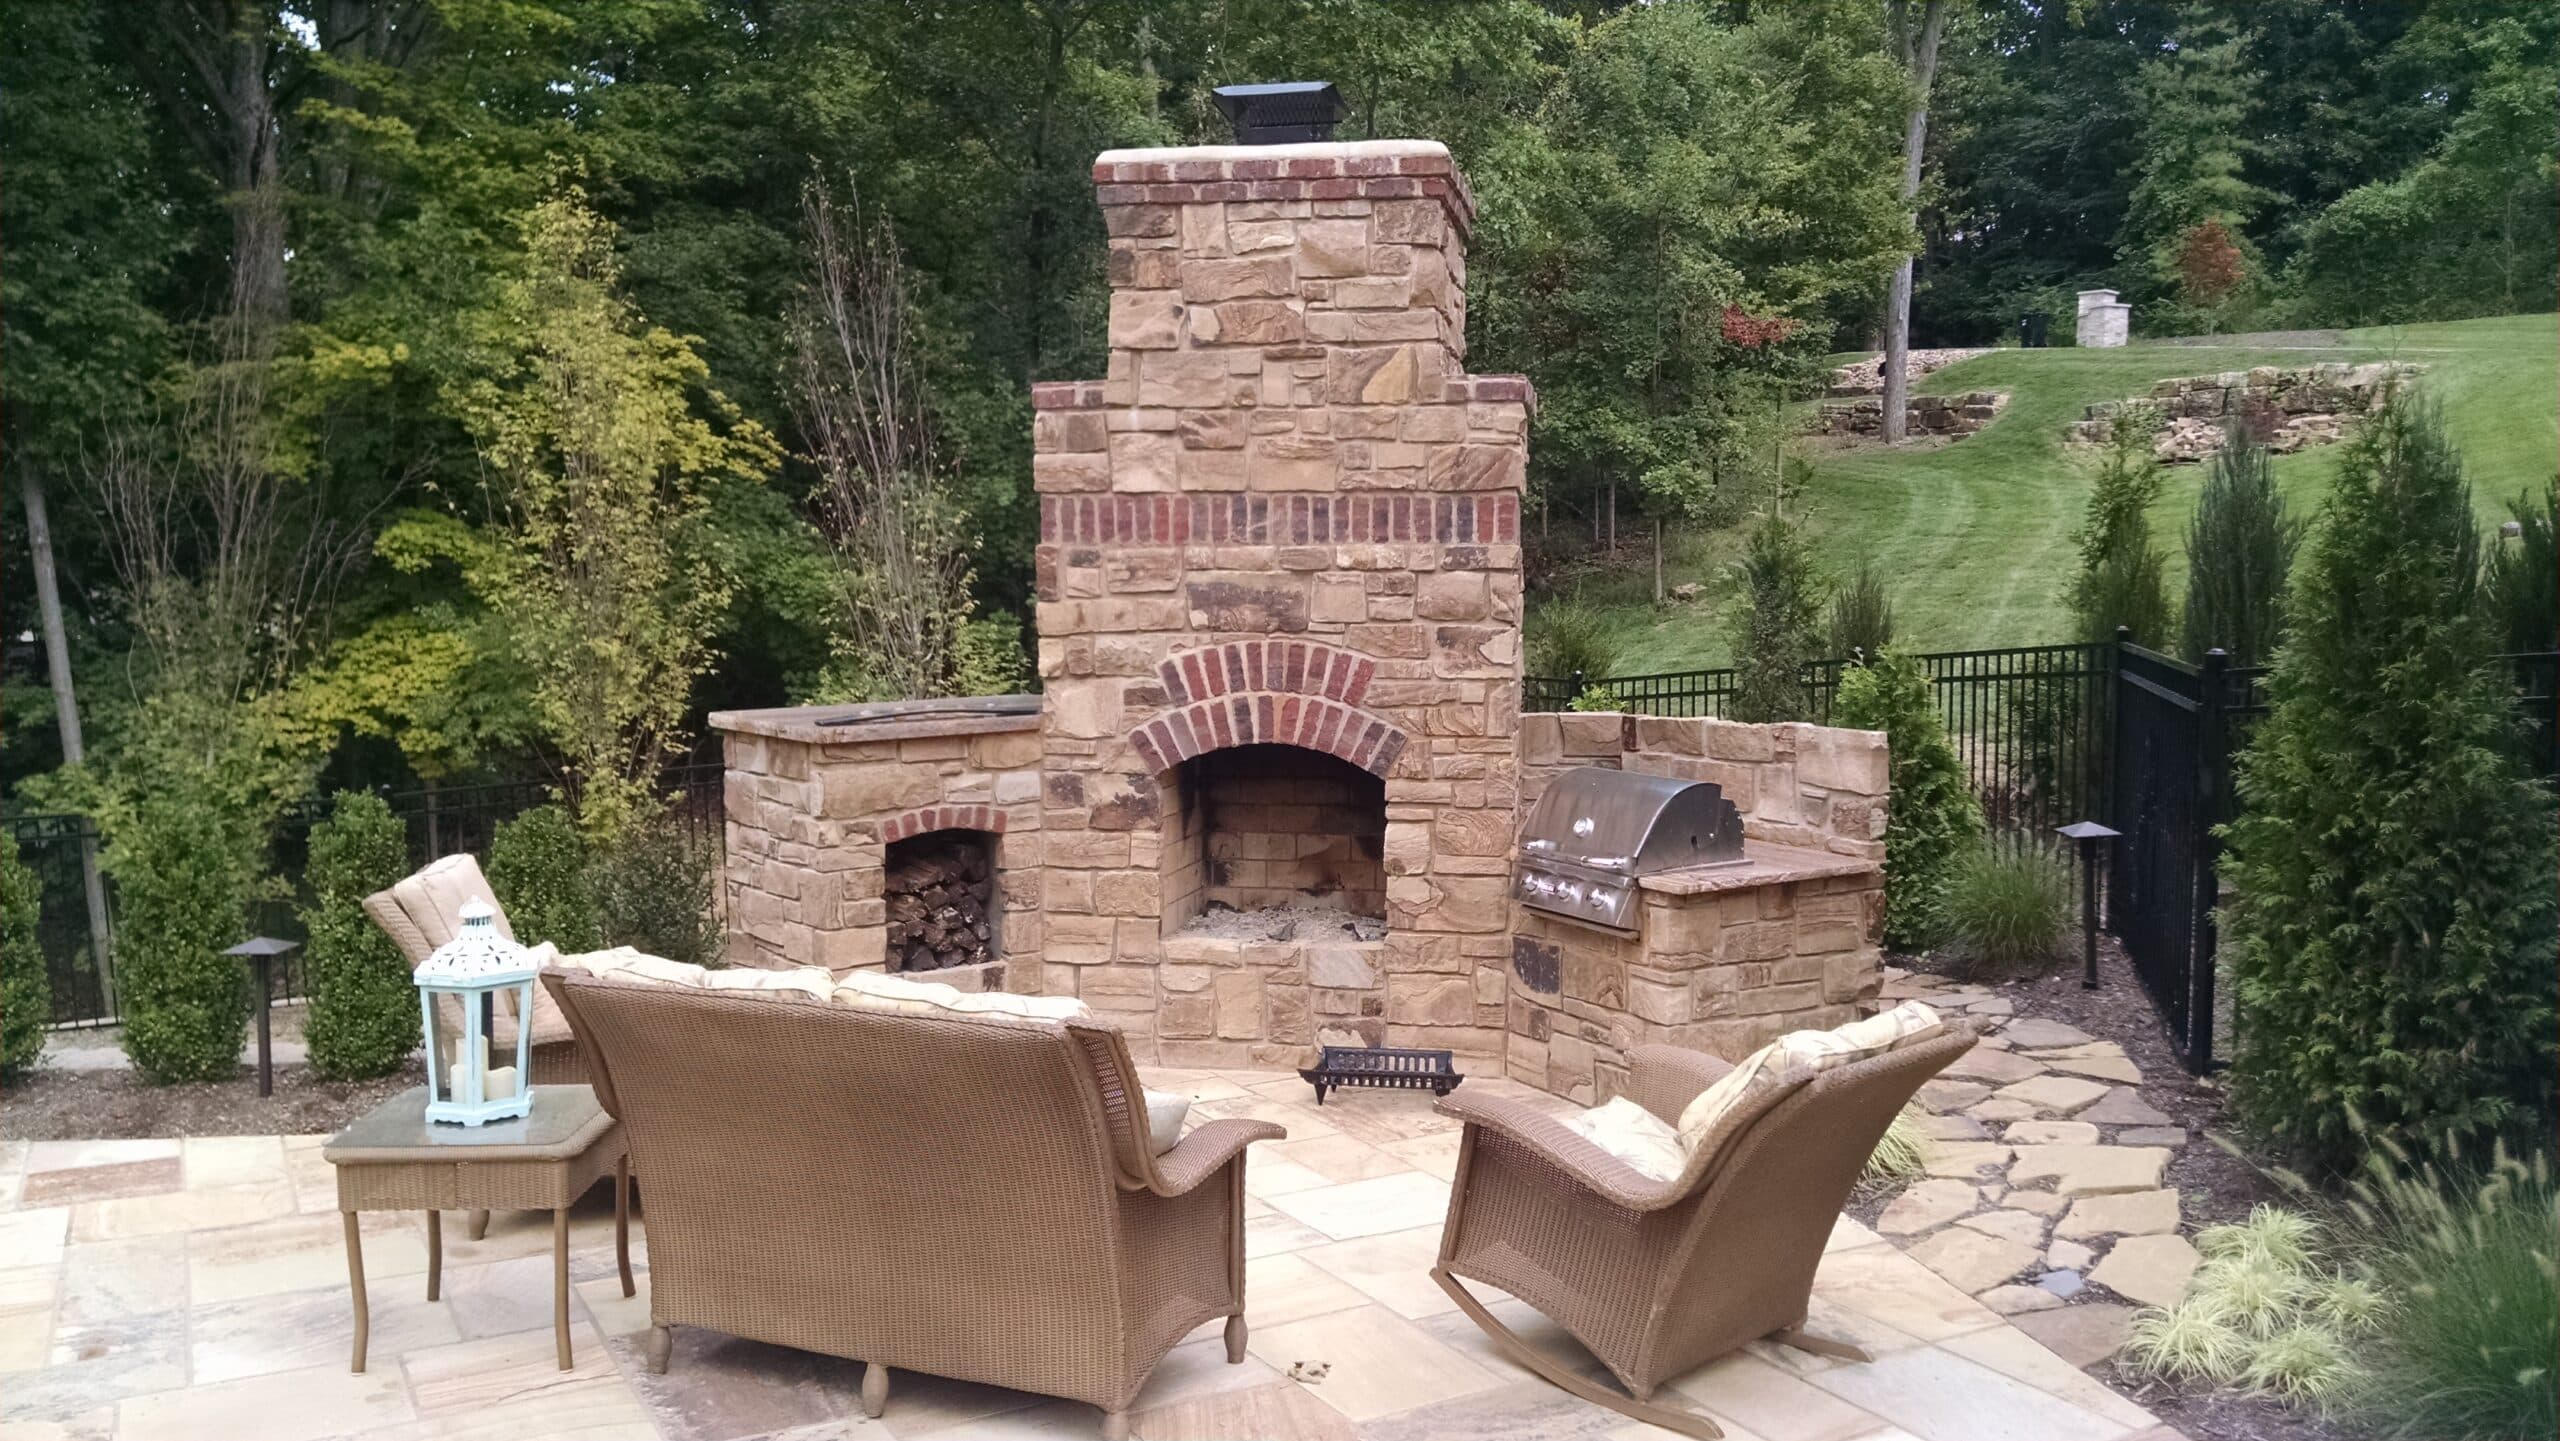 Fireplace and Barbeque